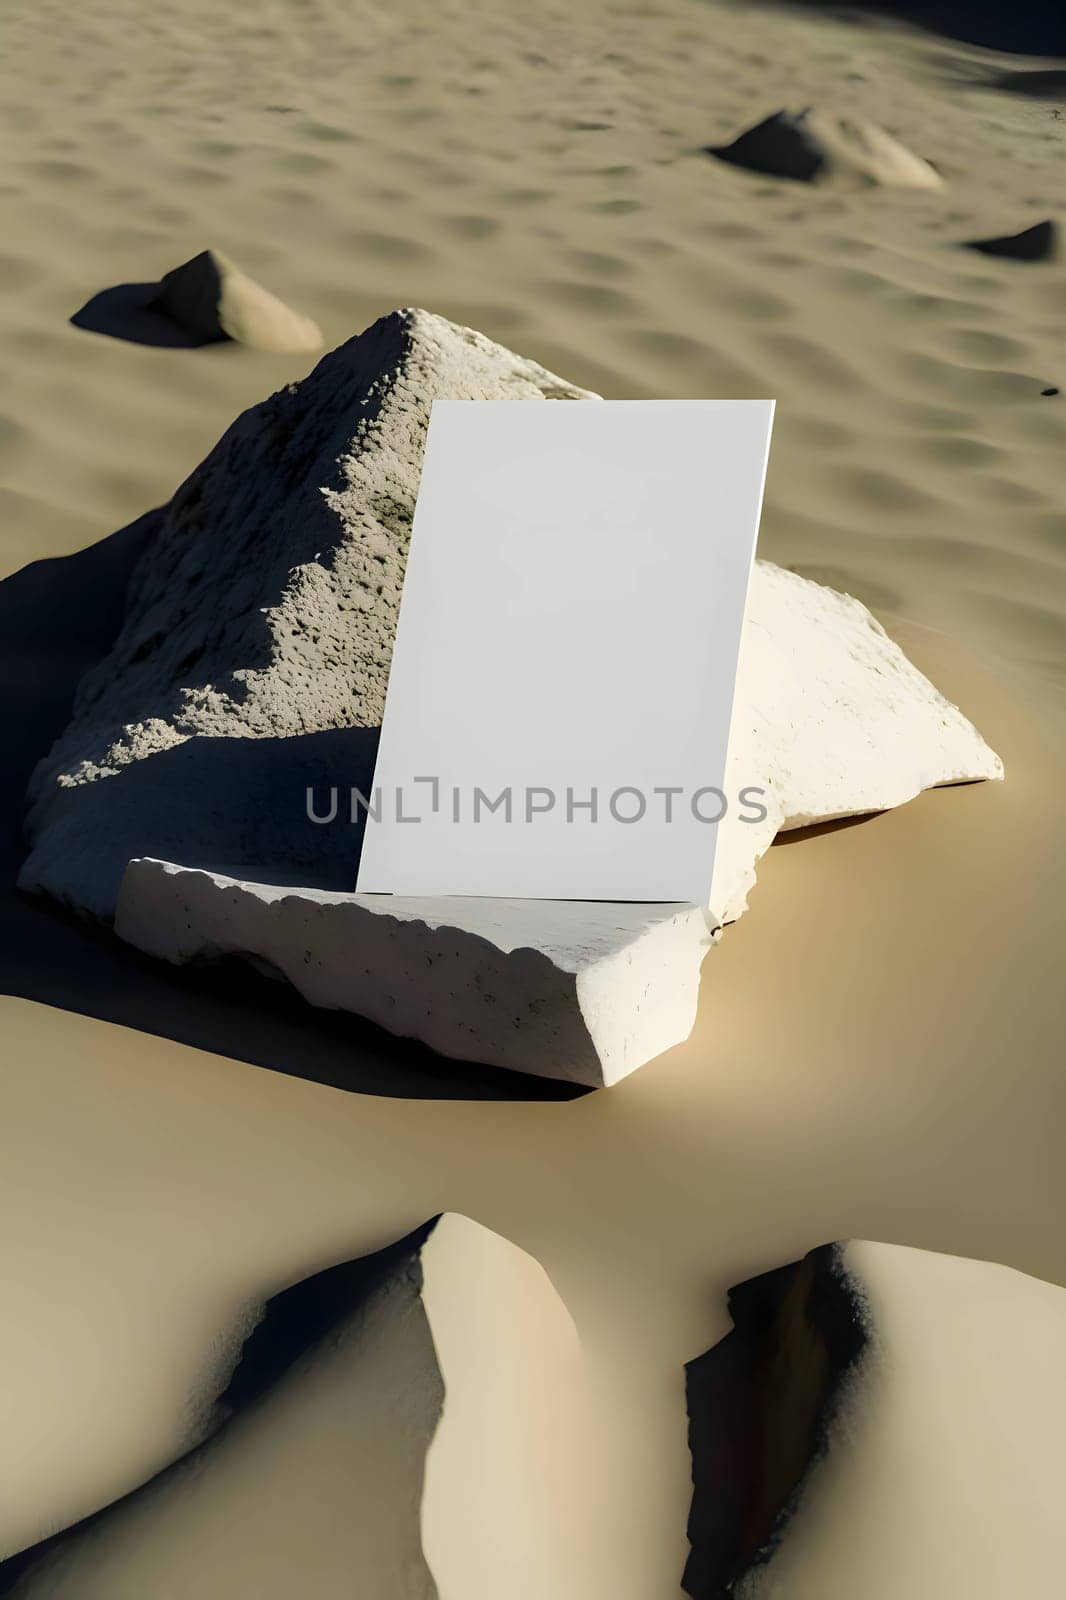 A blank white card stands out against a desert background, ready to be filled with your message or design.